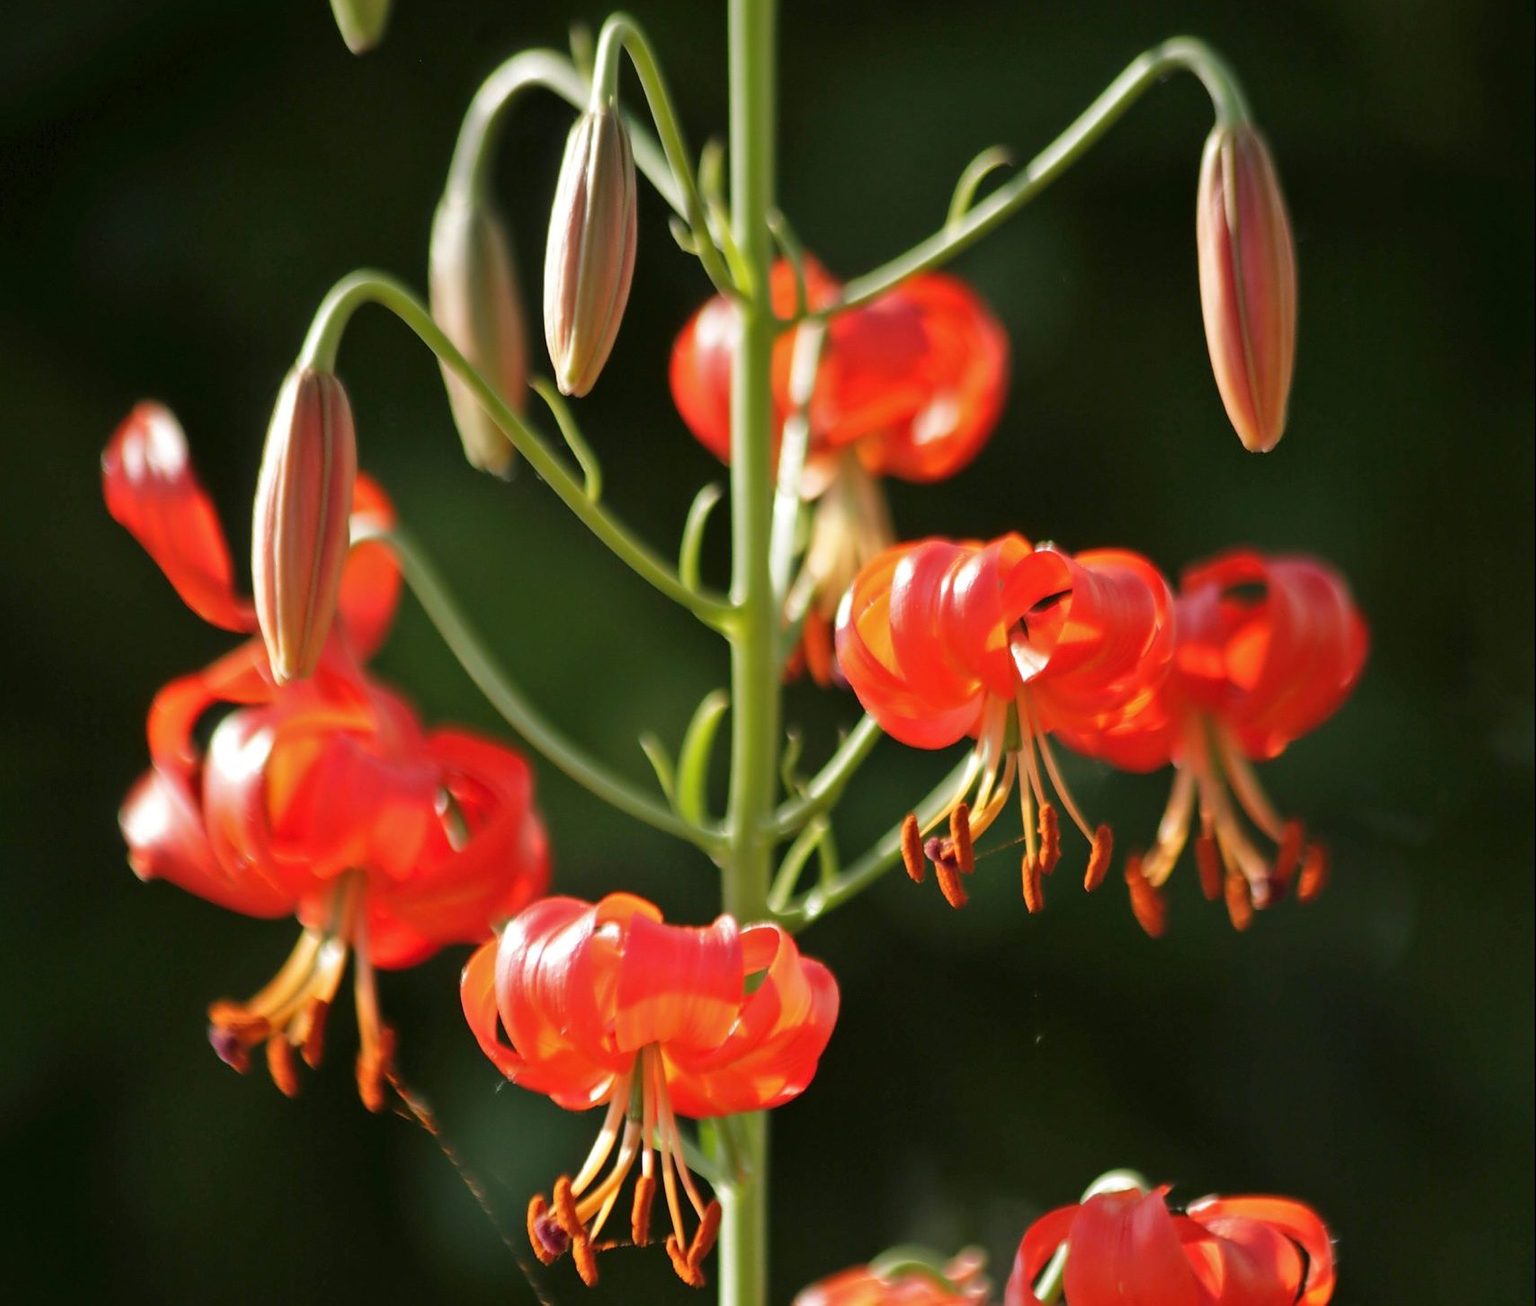 Top 10 Orange Flowers to Add a Juicy Burst of Color - Birds and Blooms